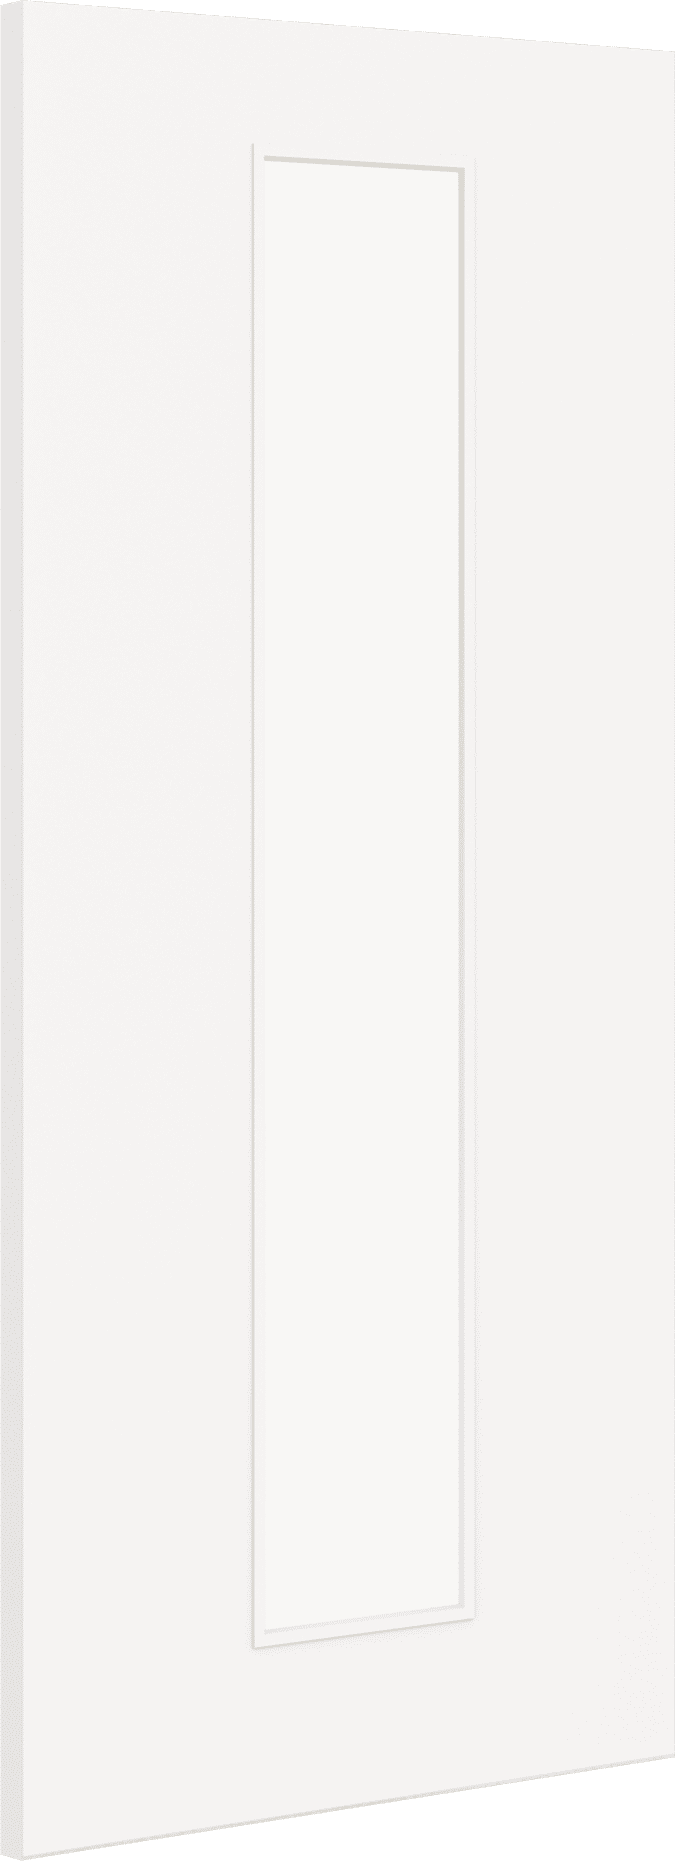 1981mm x 914mm x 44mm (36") Architectural Paint Grade White 10 Clear Glazed Fire Door Blank